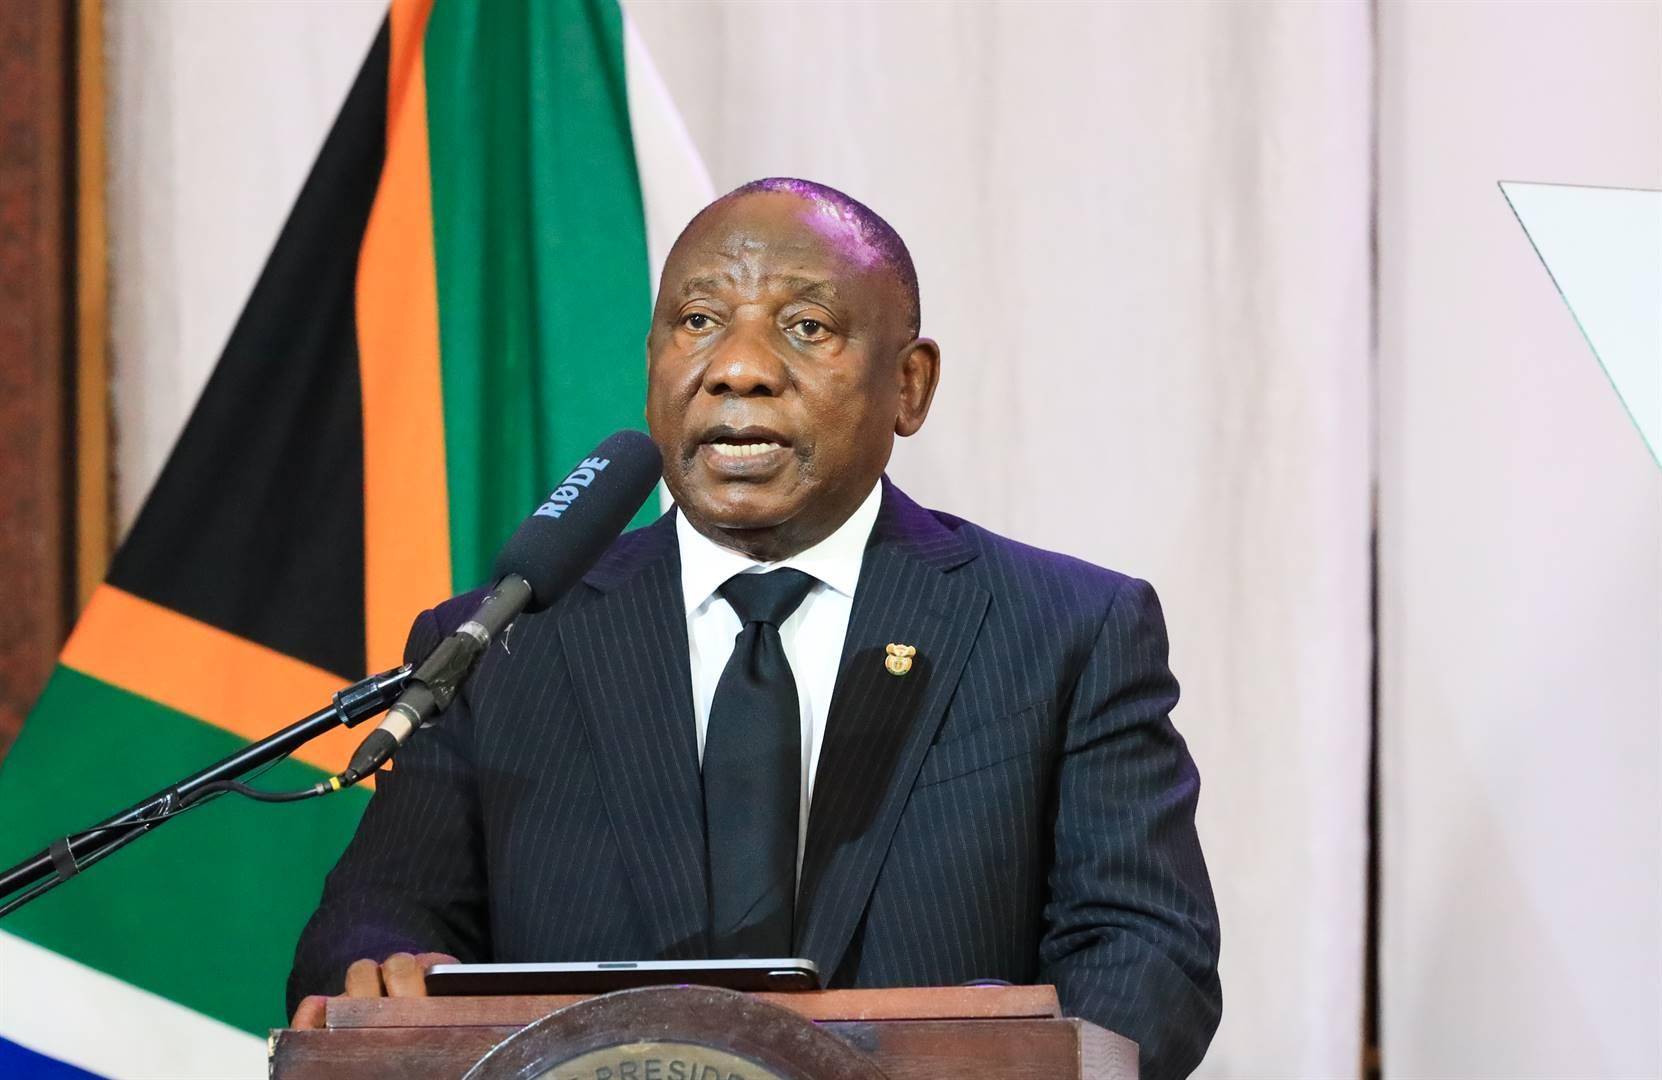 President Cyril Ramaphosa  thanked the ICJ for upholding its role of achieving justice, promoting peace and preventing genocide. Photo: Gallo Images